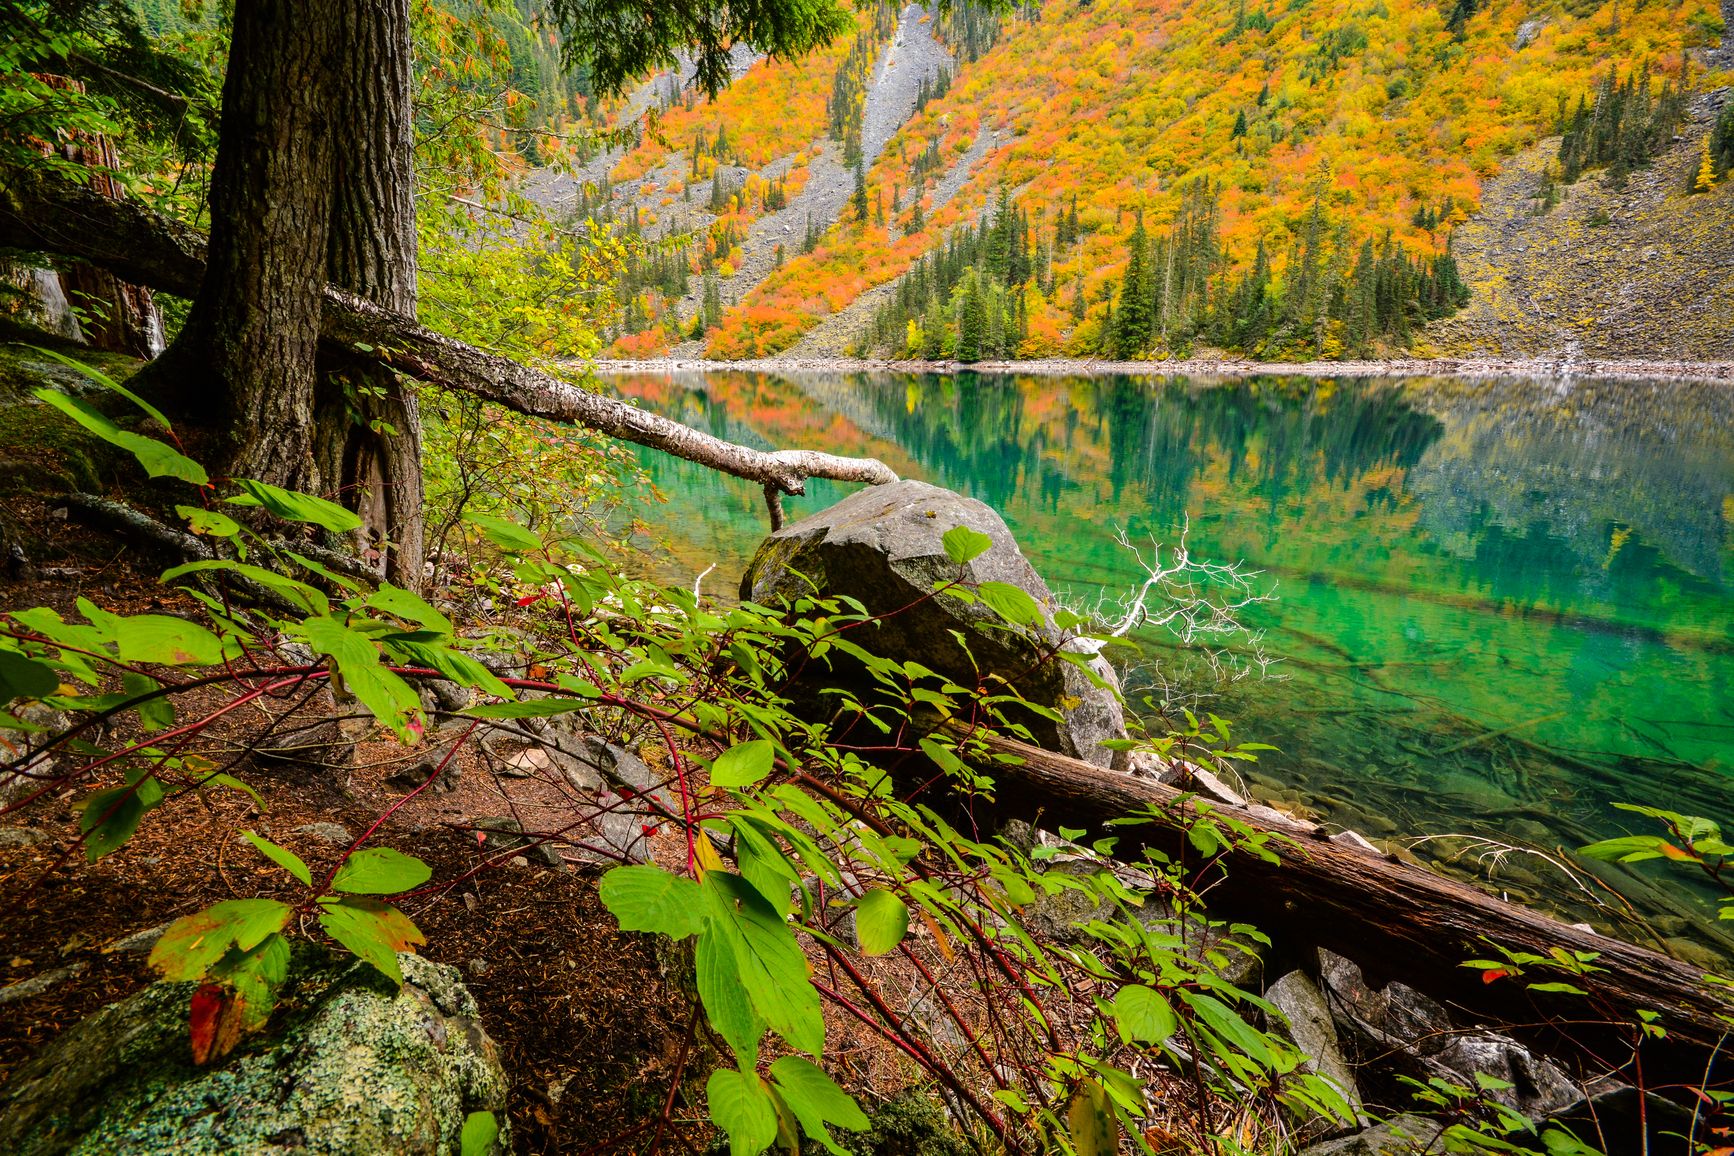 The water of Lindeman Lake in Sx̱ótsaqel/Chilliwack Lake Park is clear and emerald-colored.